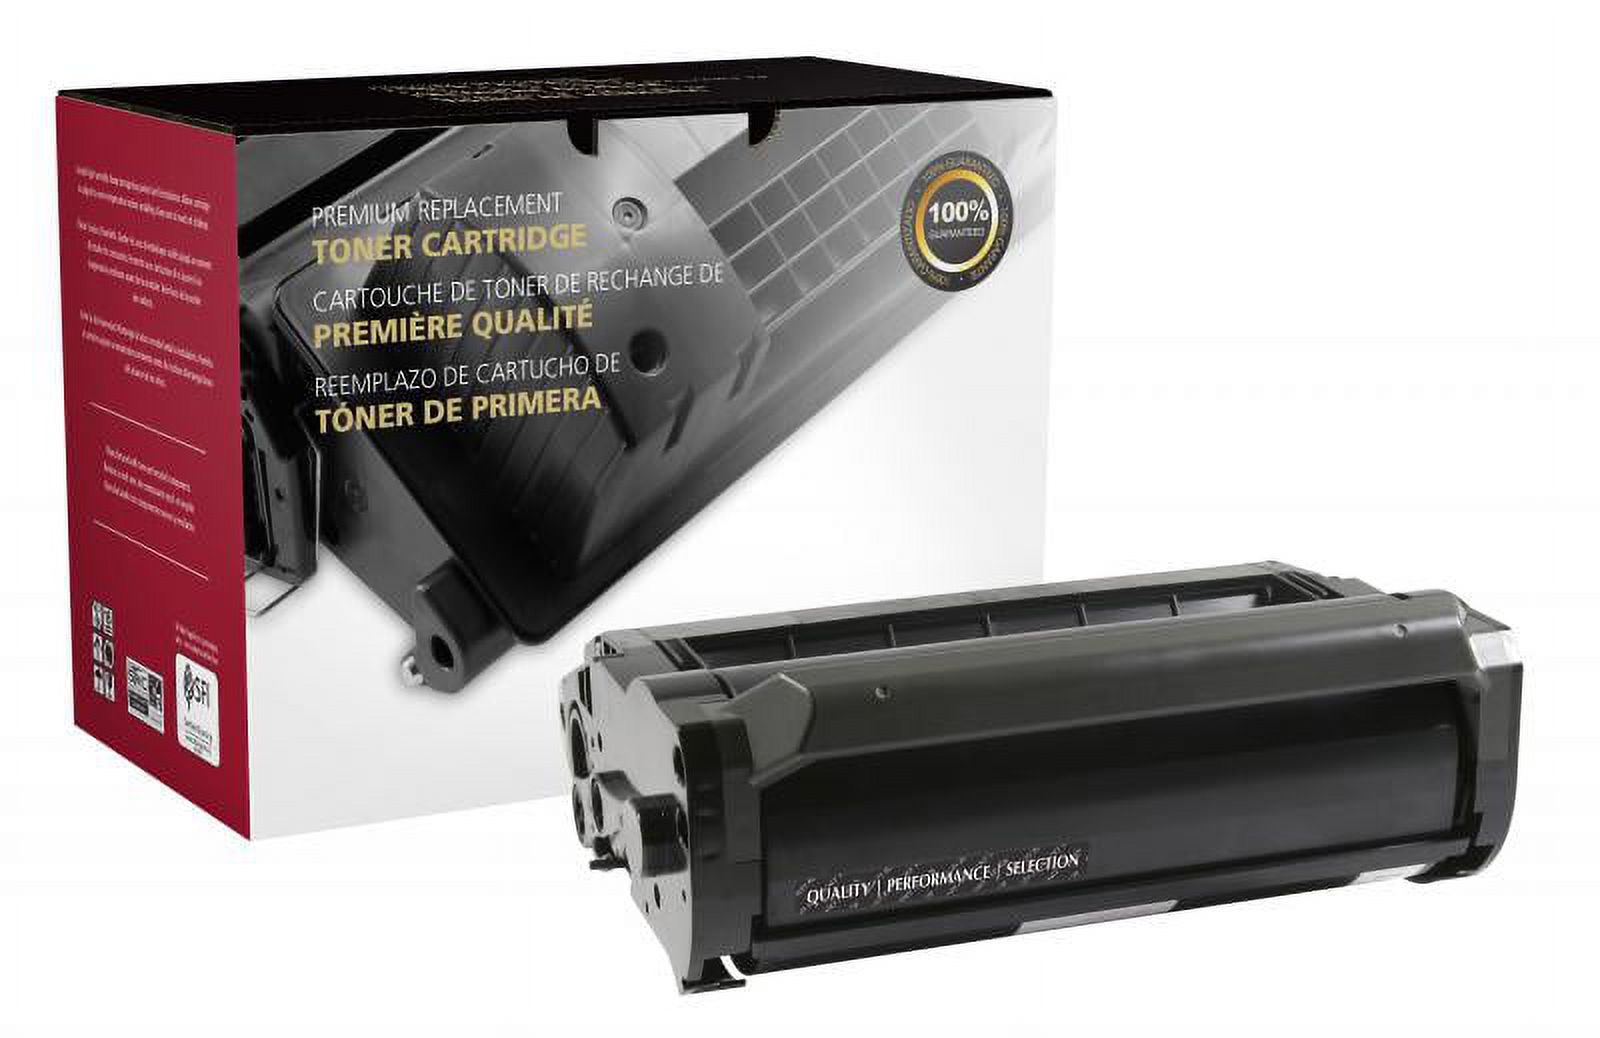 Clover Imaging Remanufactured Toner Cartridge for Ricoh 406683 - image 1 of 2